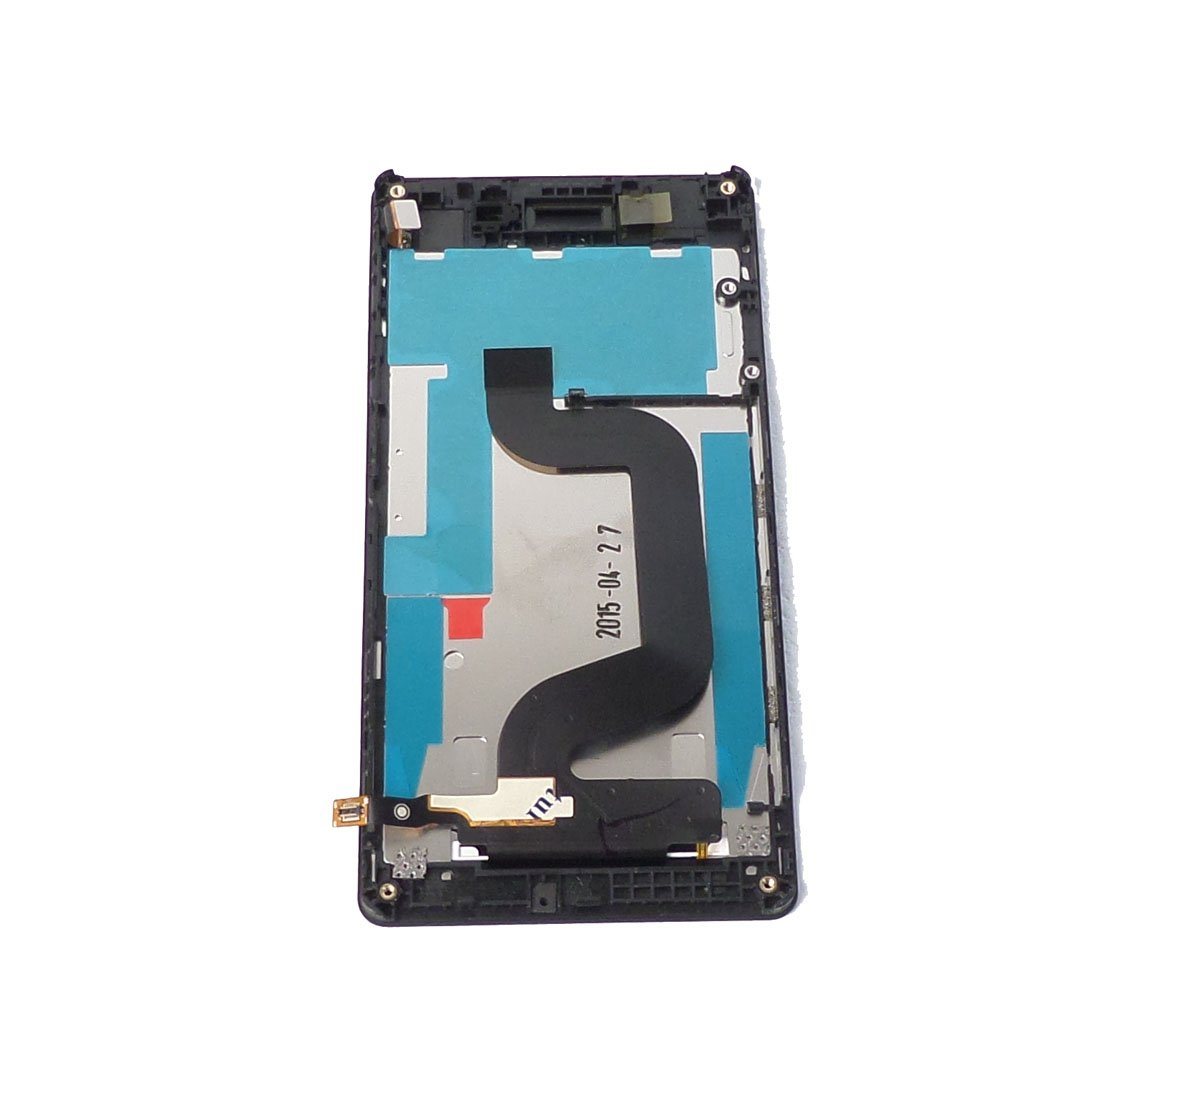 Screen touch glass and LCD assembled on chassis black for Sony Xperia E3 D2203 D2206